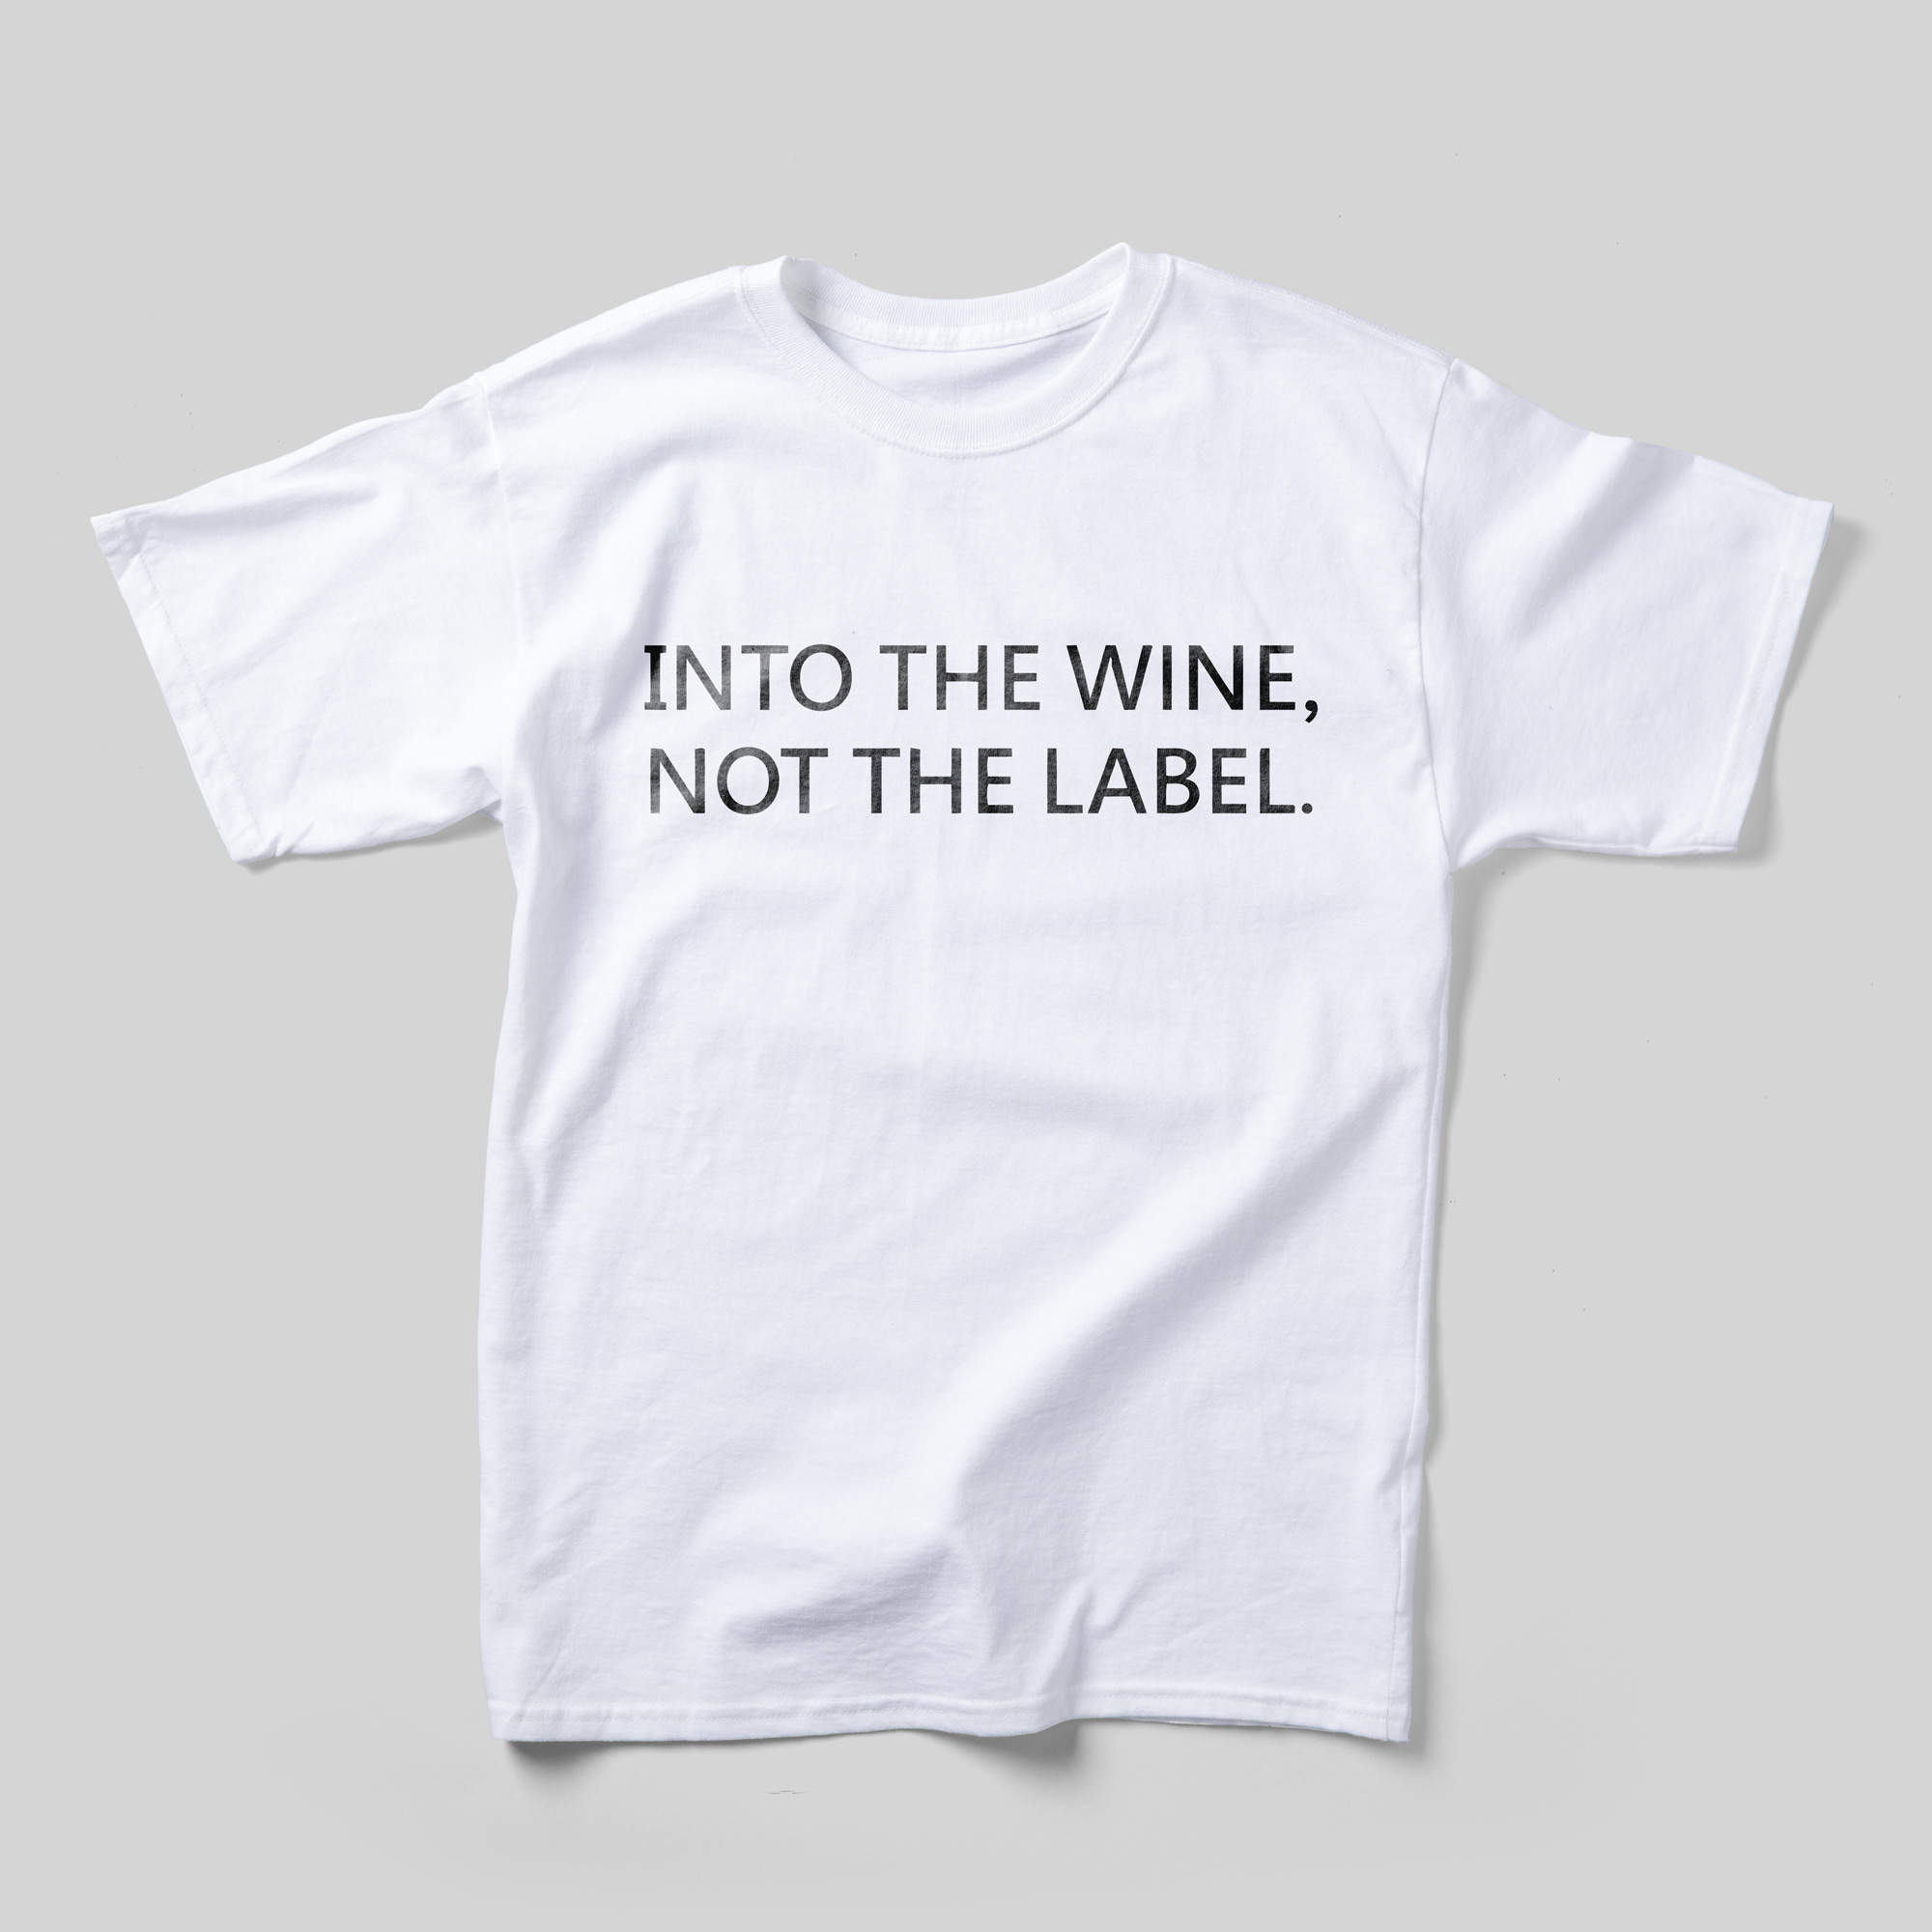 A white t-shirt that reads Into the wine, not the label in black text.